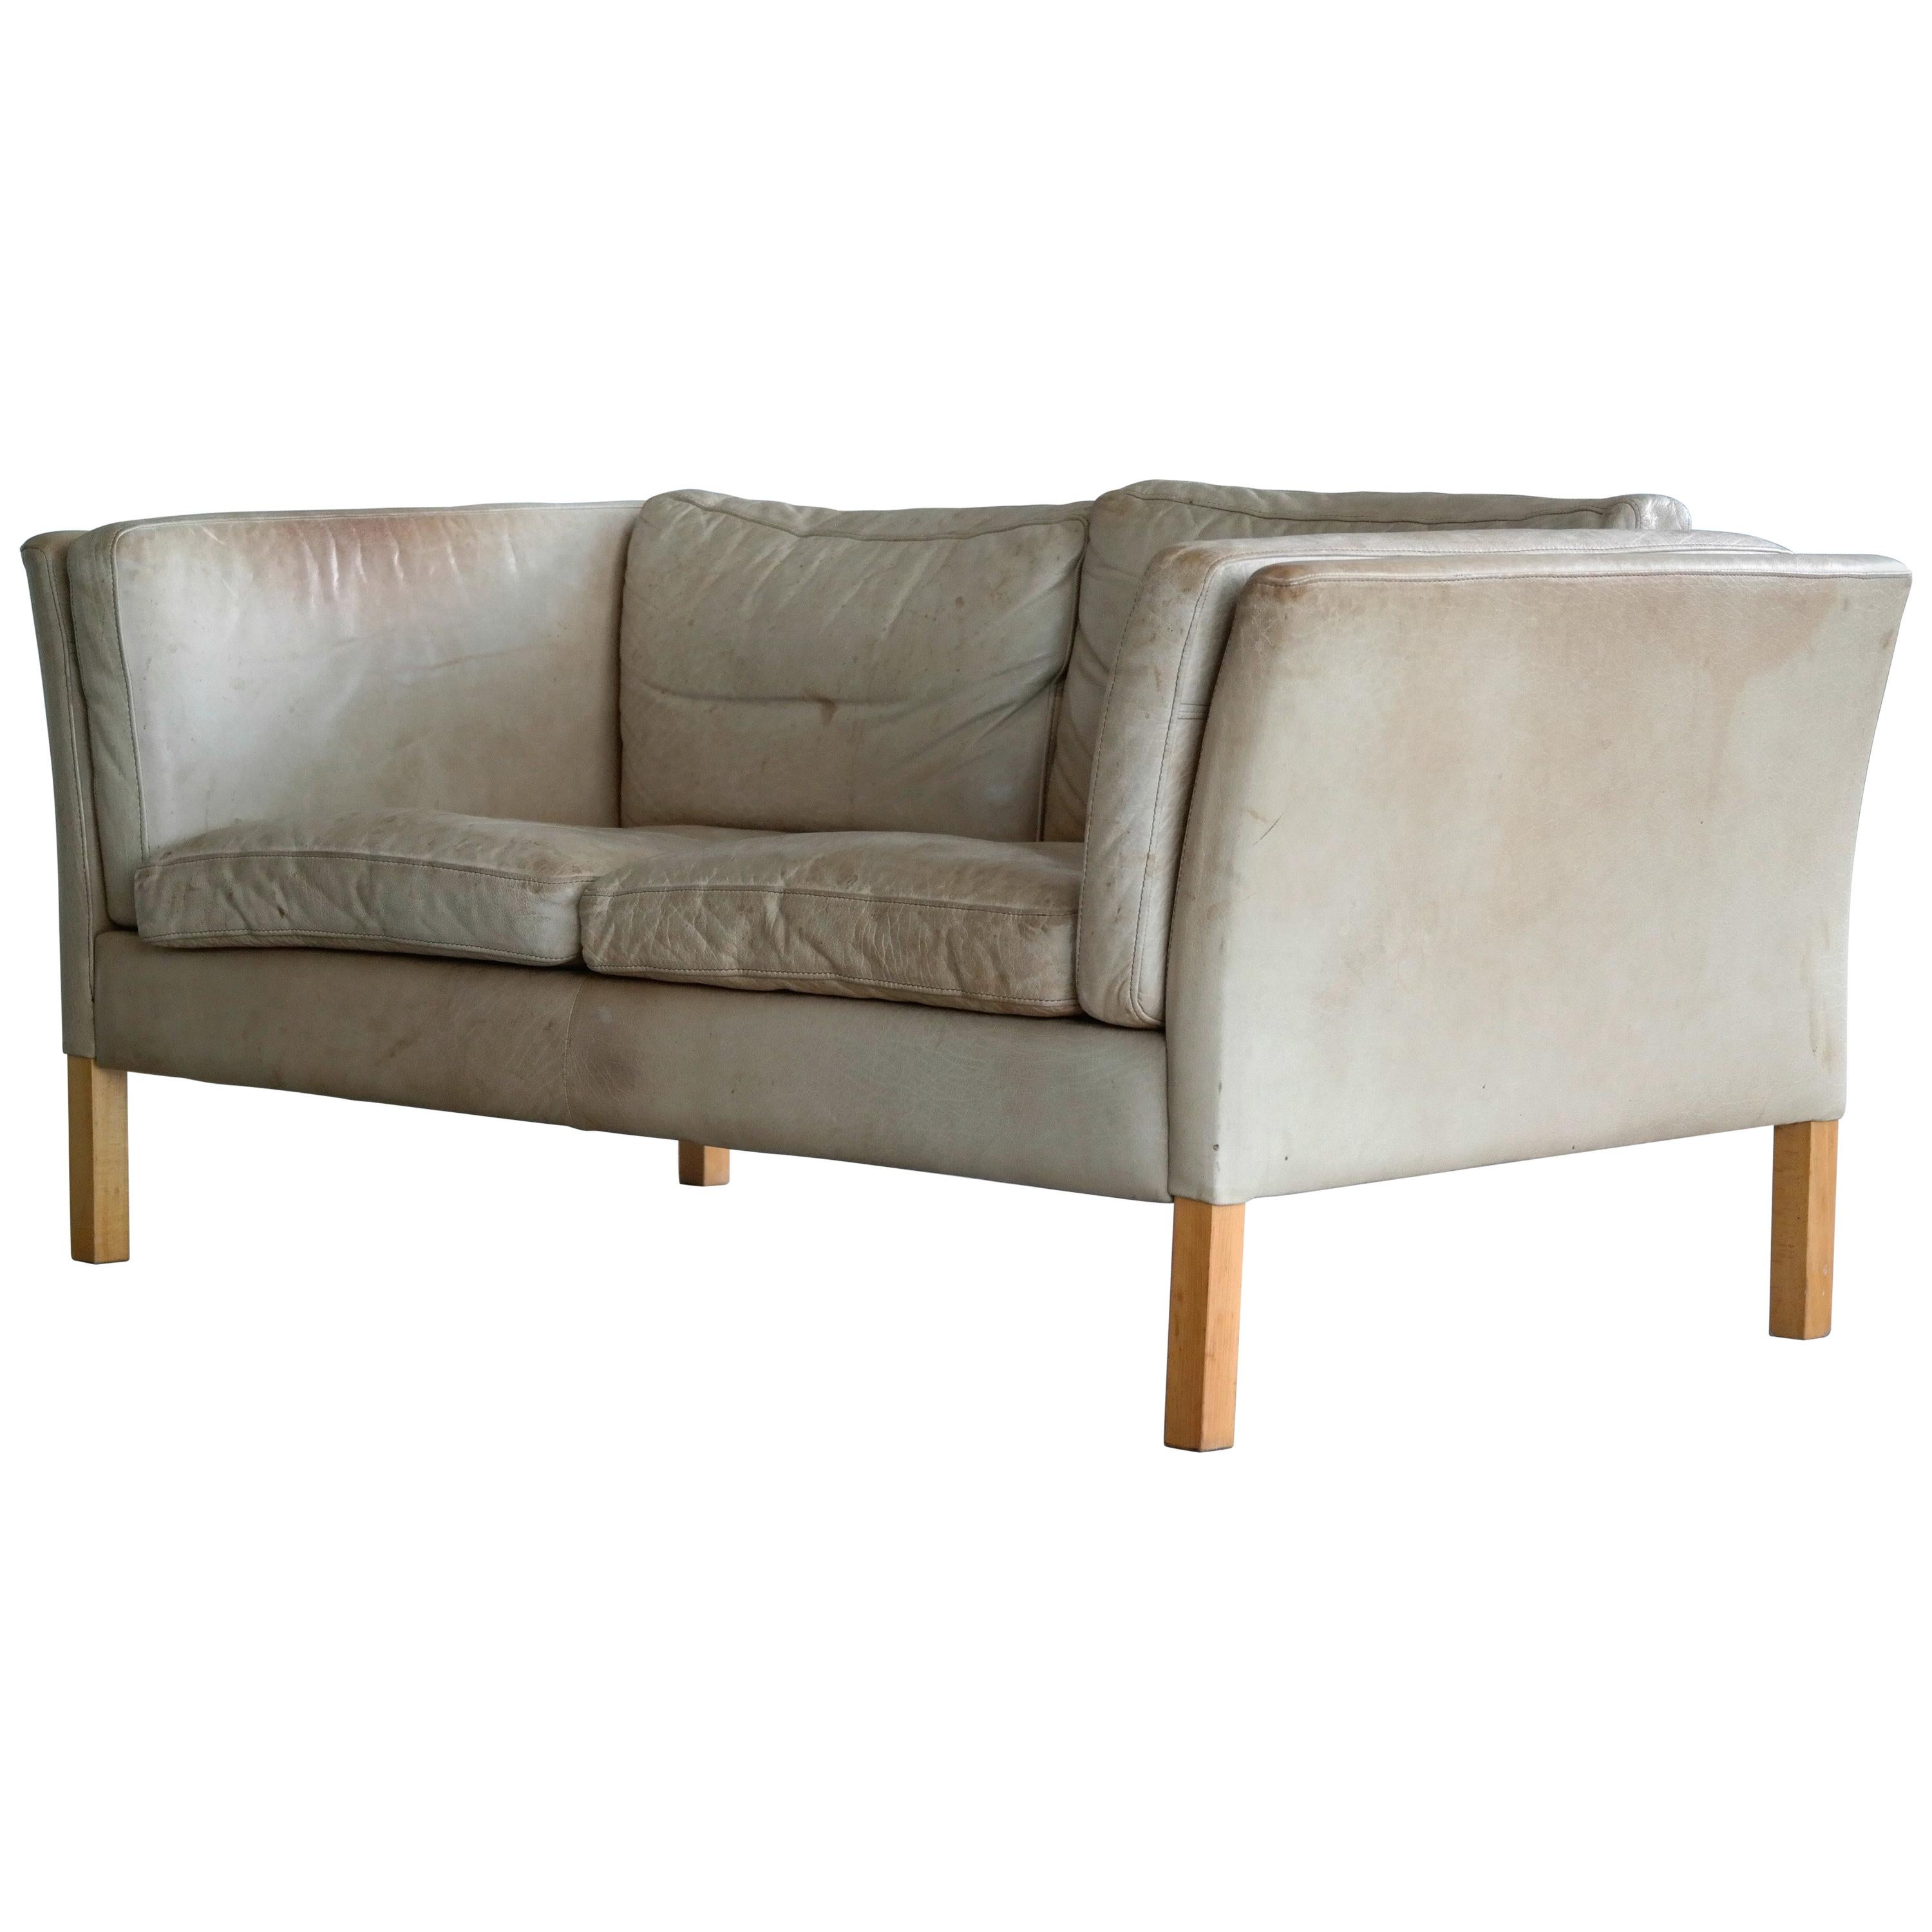 Borge Mogensen Style Two-Seat Sofa in Tan Patinated Leather by Stouby